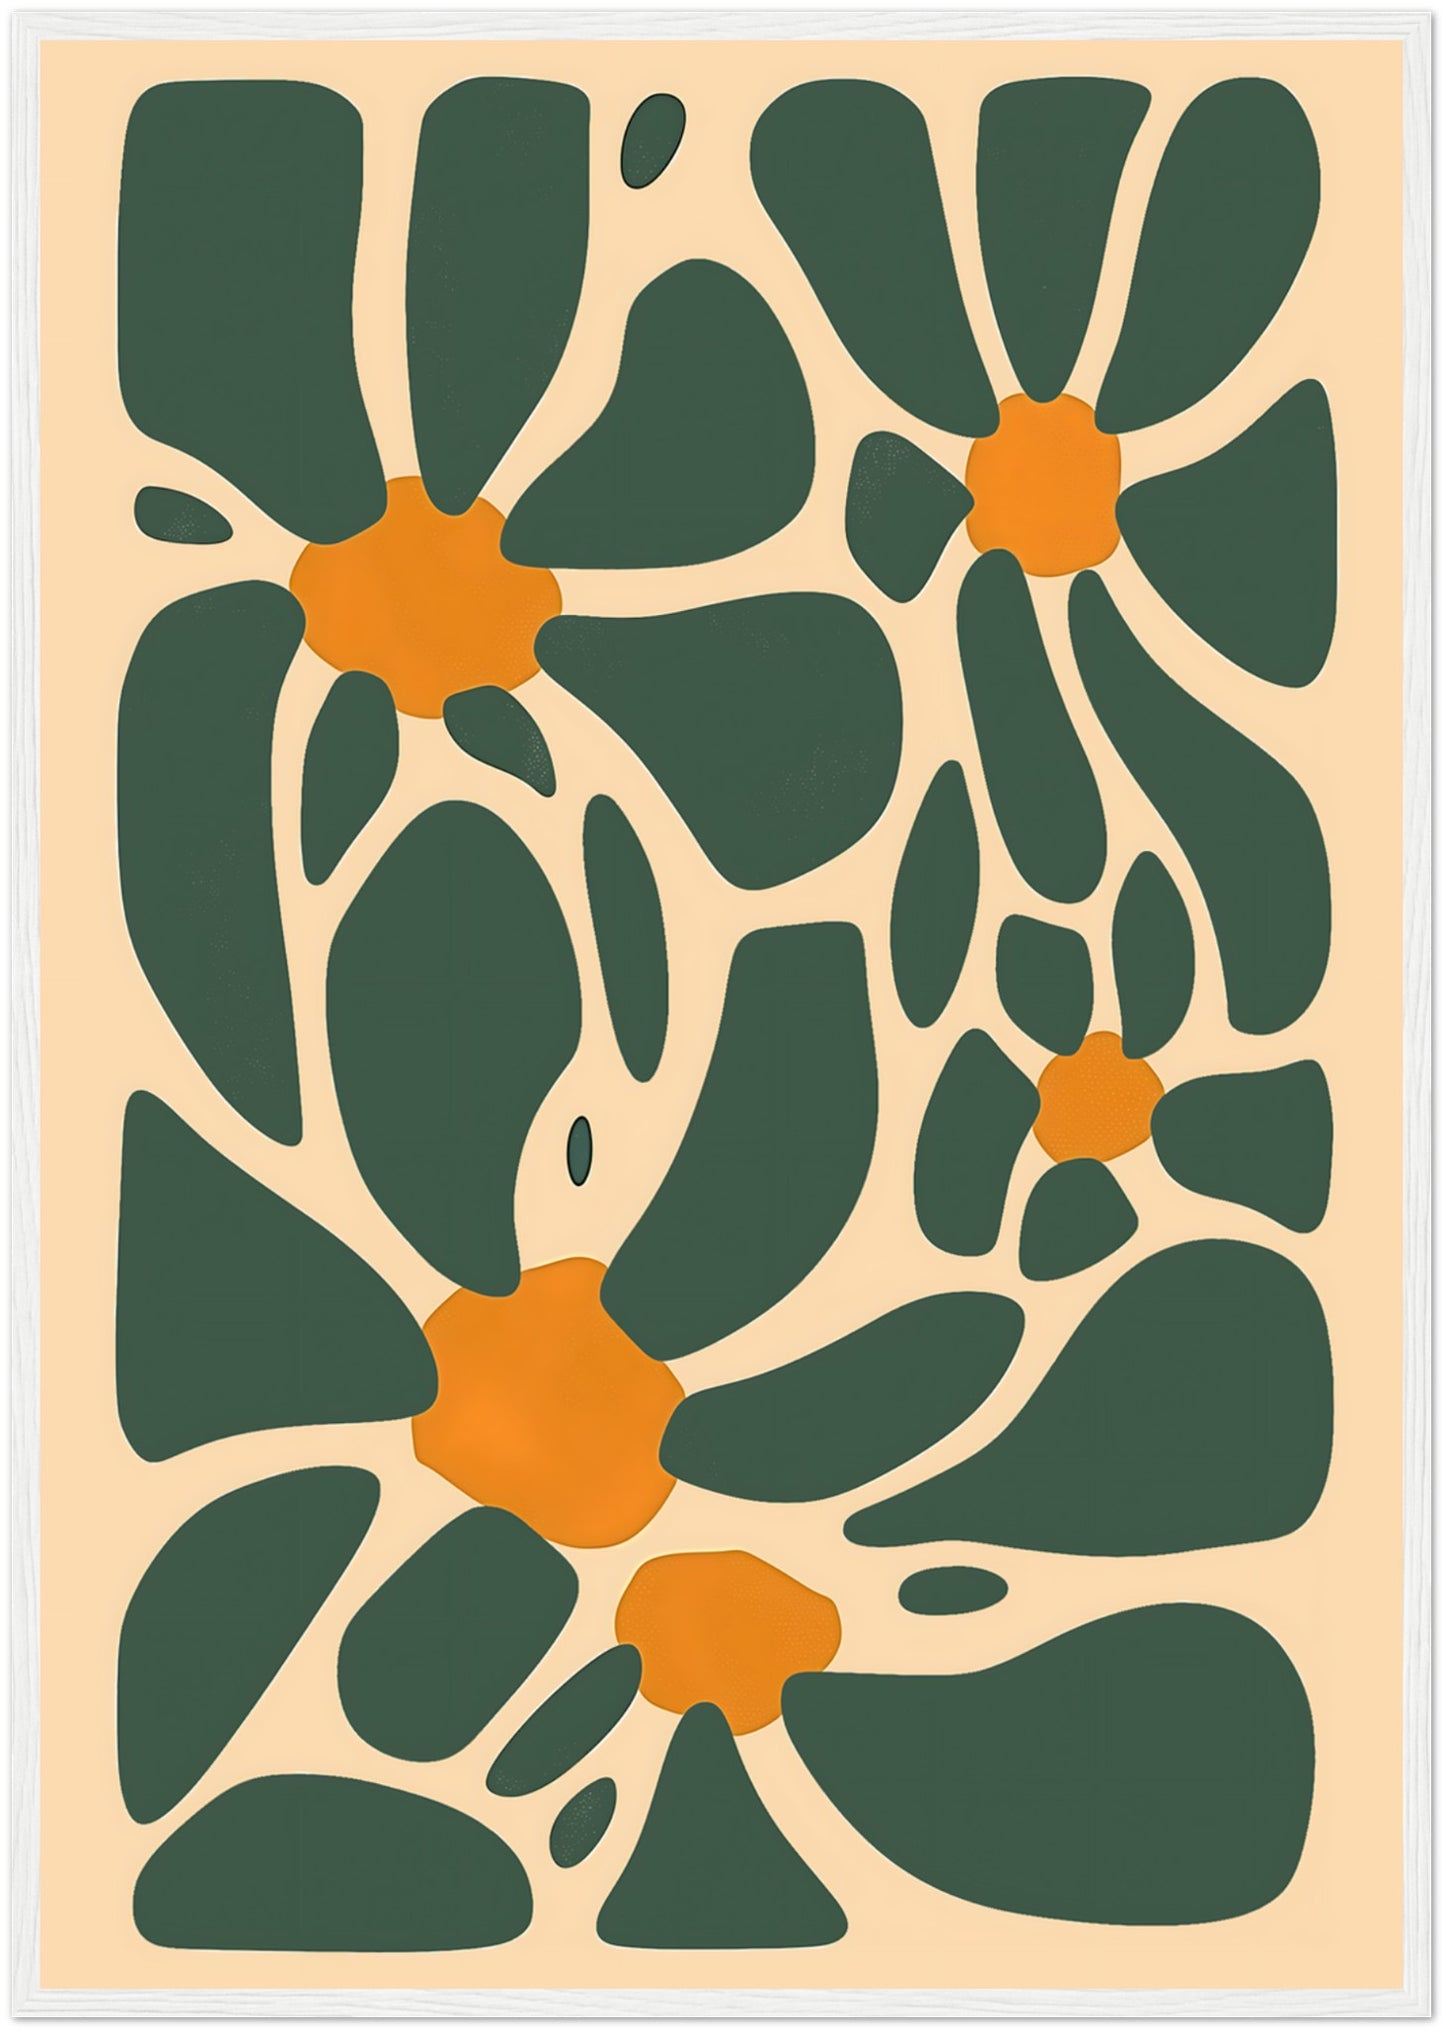 Abstract floral art with a retro color palette in a wooden frame.